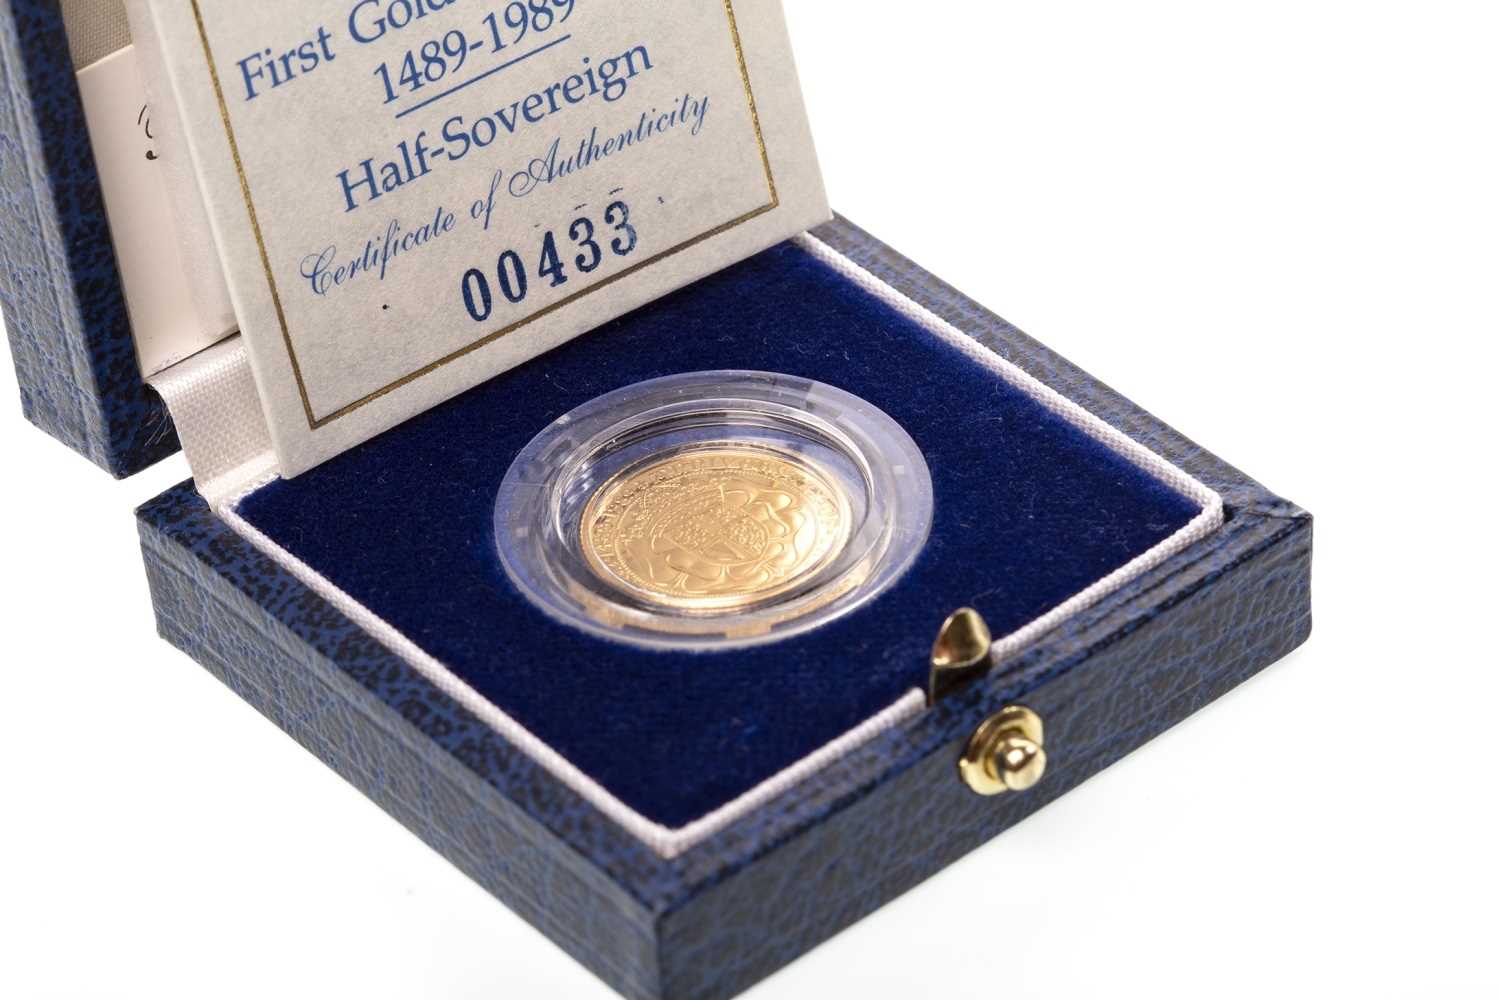 Lot 567 - A GOLD PROOF HALF SOVEREIGN, 1489-1989